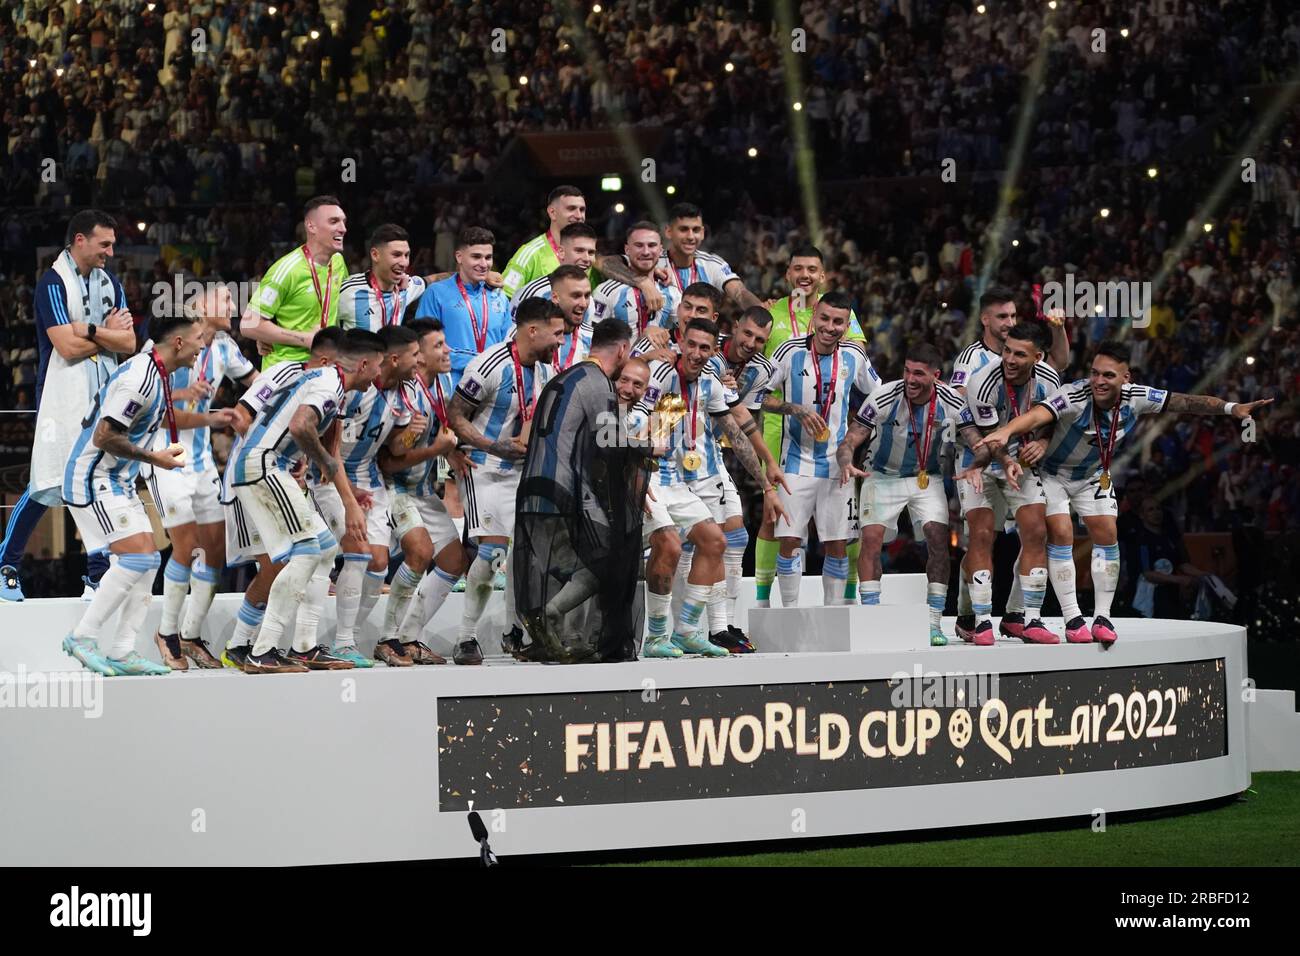 Lusail, Qatar, 18th. December 2022. Lionel Messi previous to lift the Fifa World Cup. Argentina vs. France, Match 64, Final match of the Fifa World Cu Stock Photo